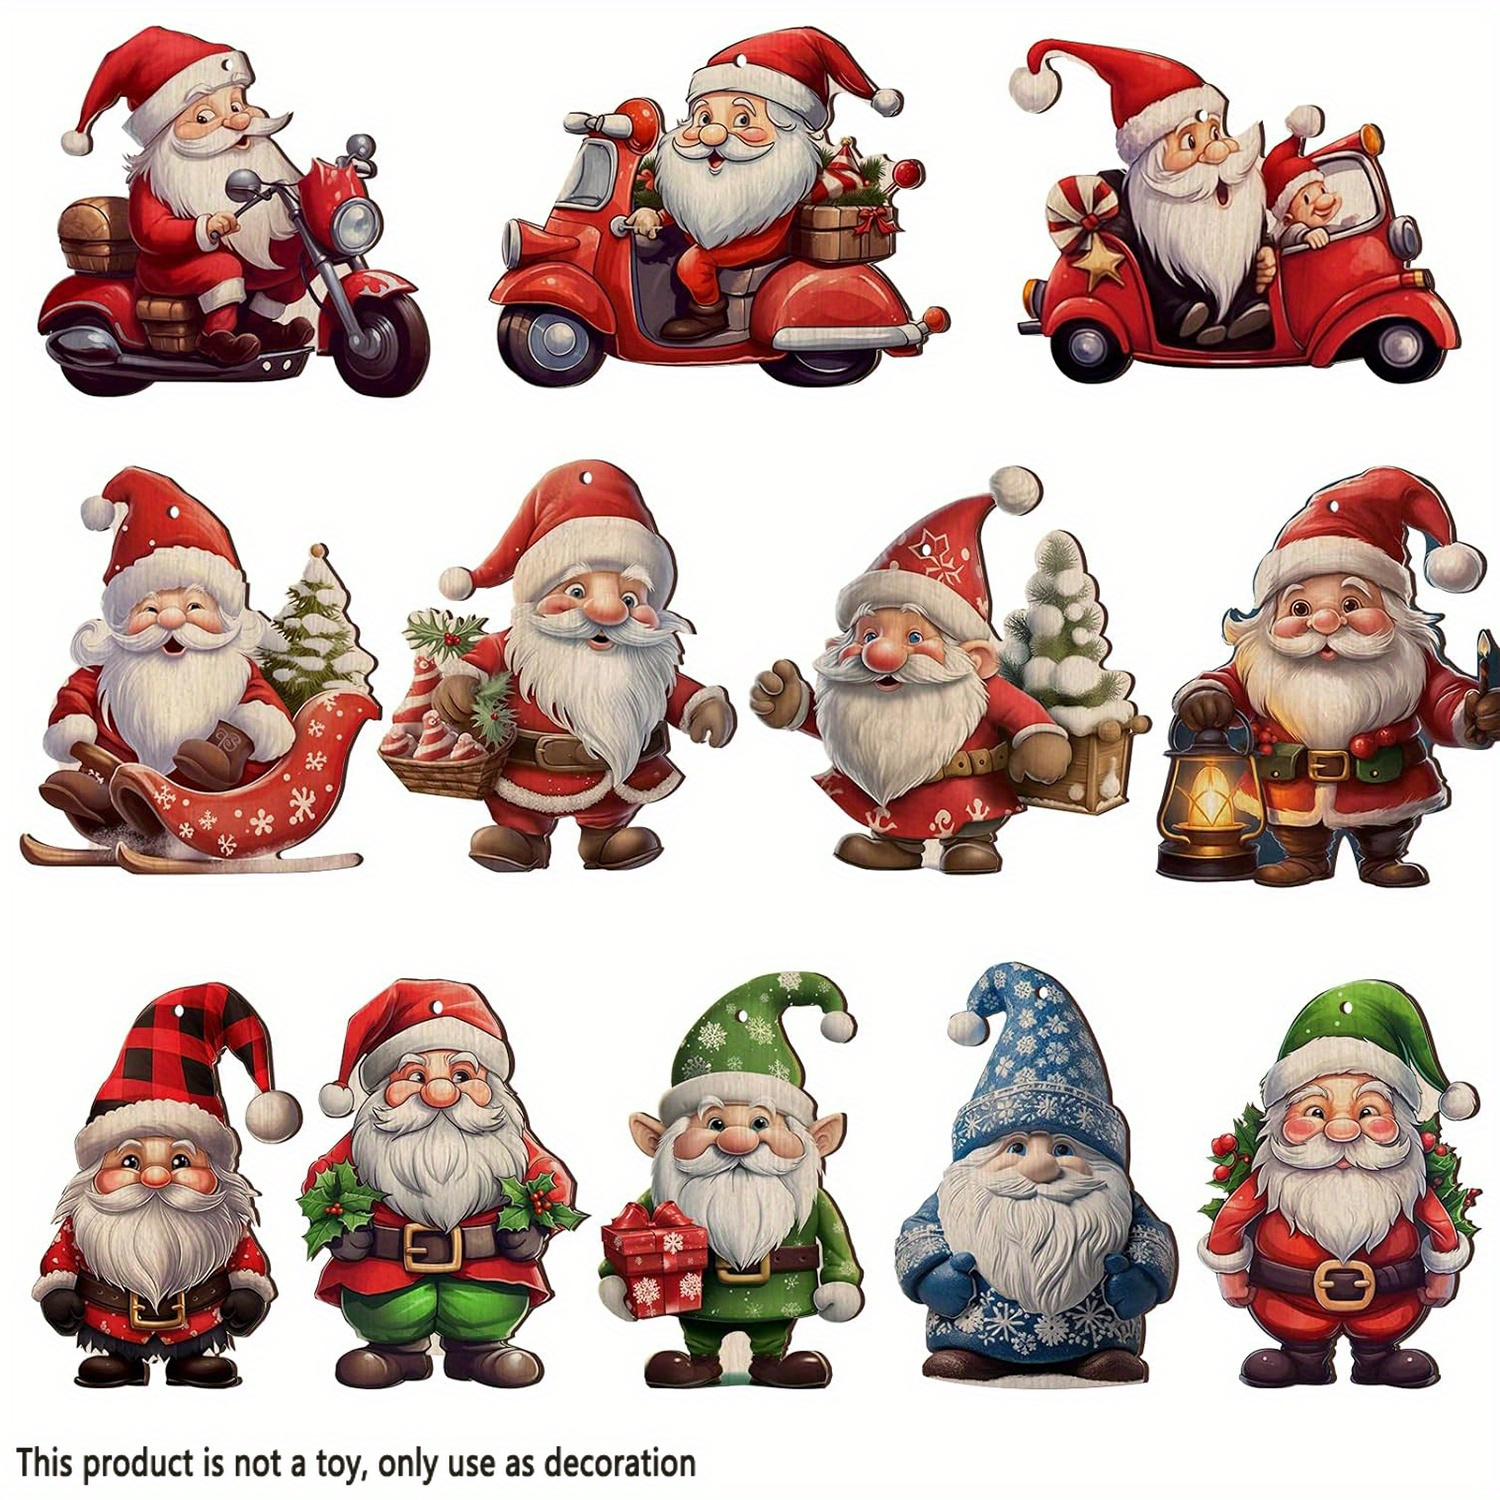 

24-piece Santa Sleigh Wooden Ornaments Set - Perfect For Christmas Tree, Home & Yard Decor | No Battery Needed